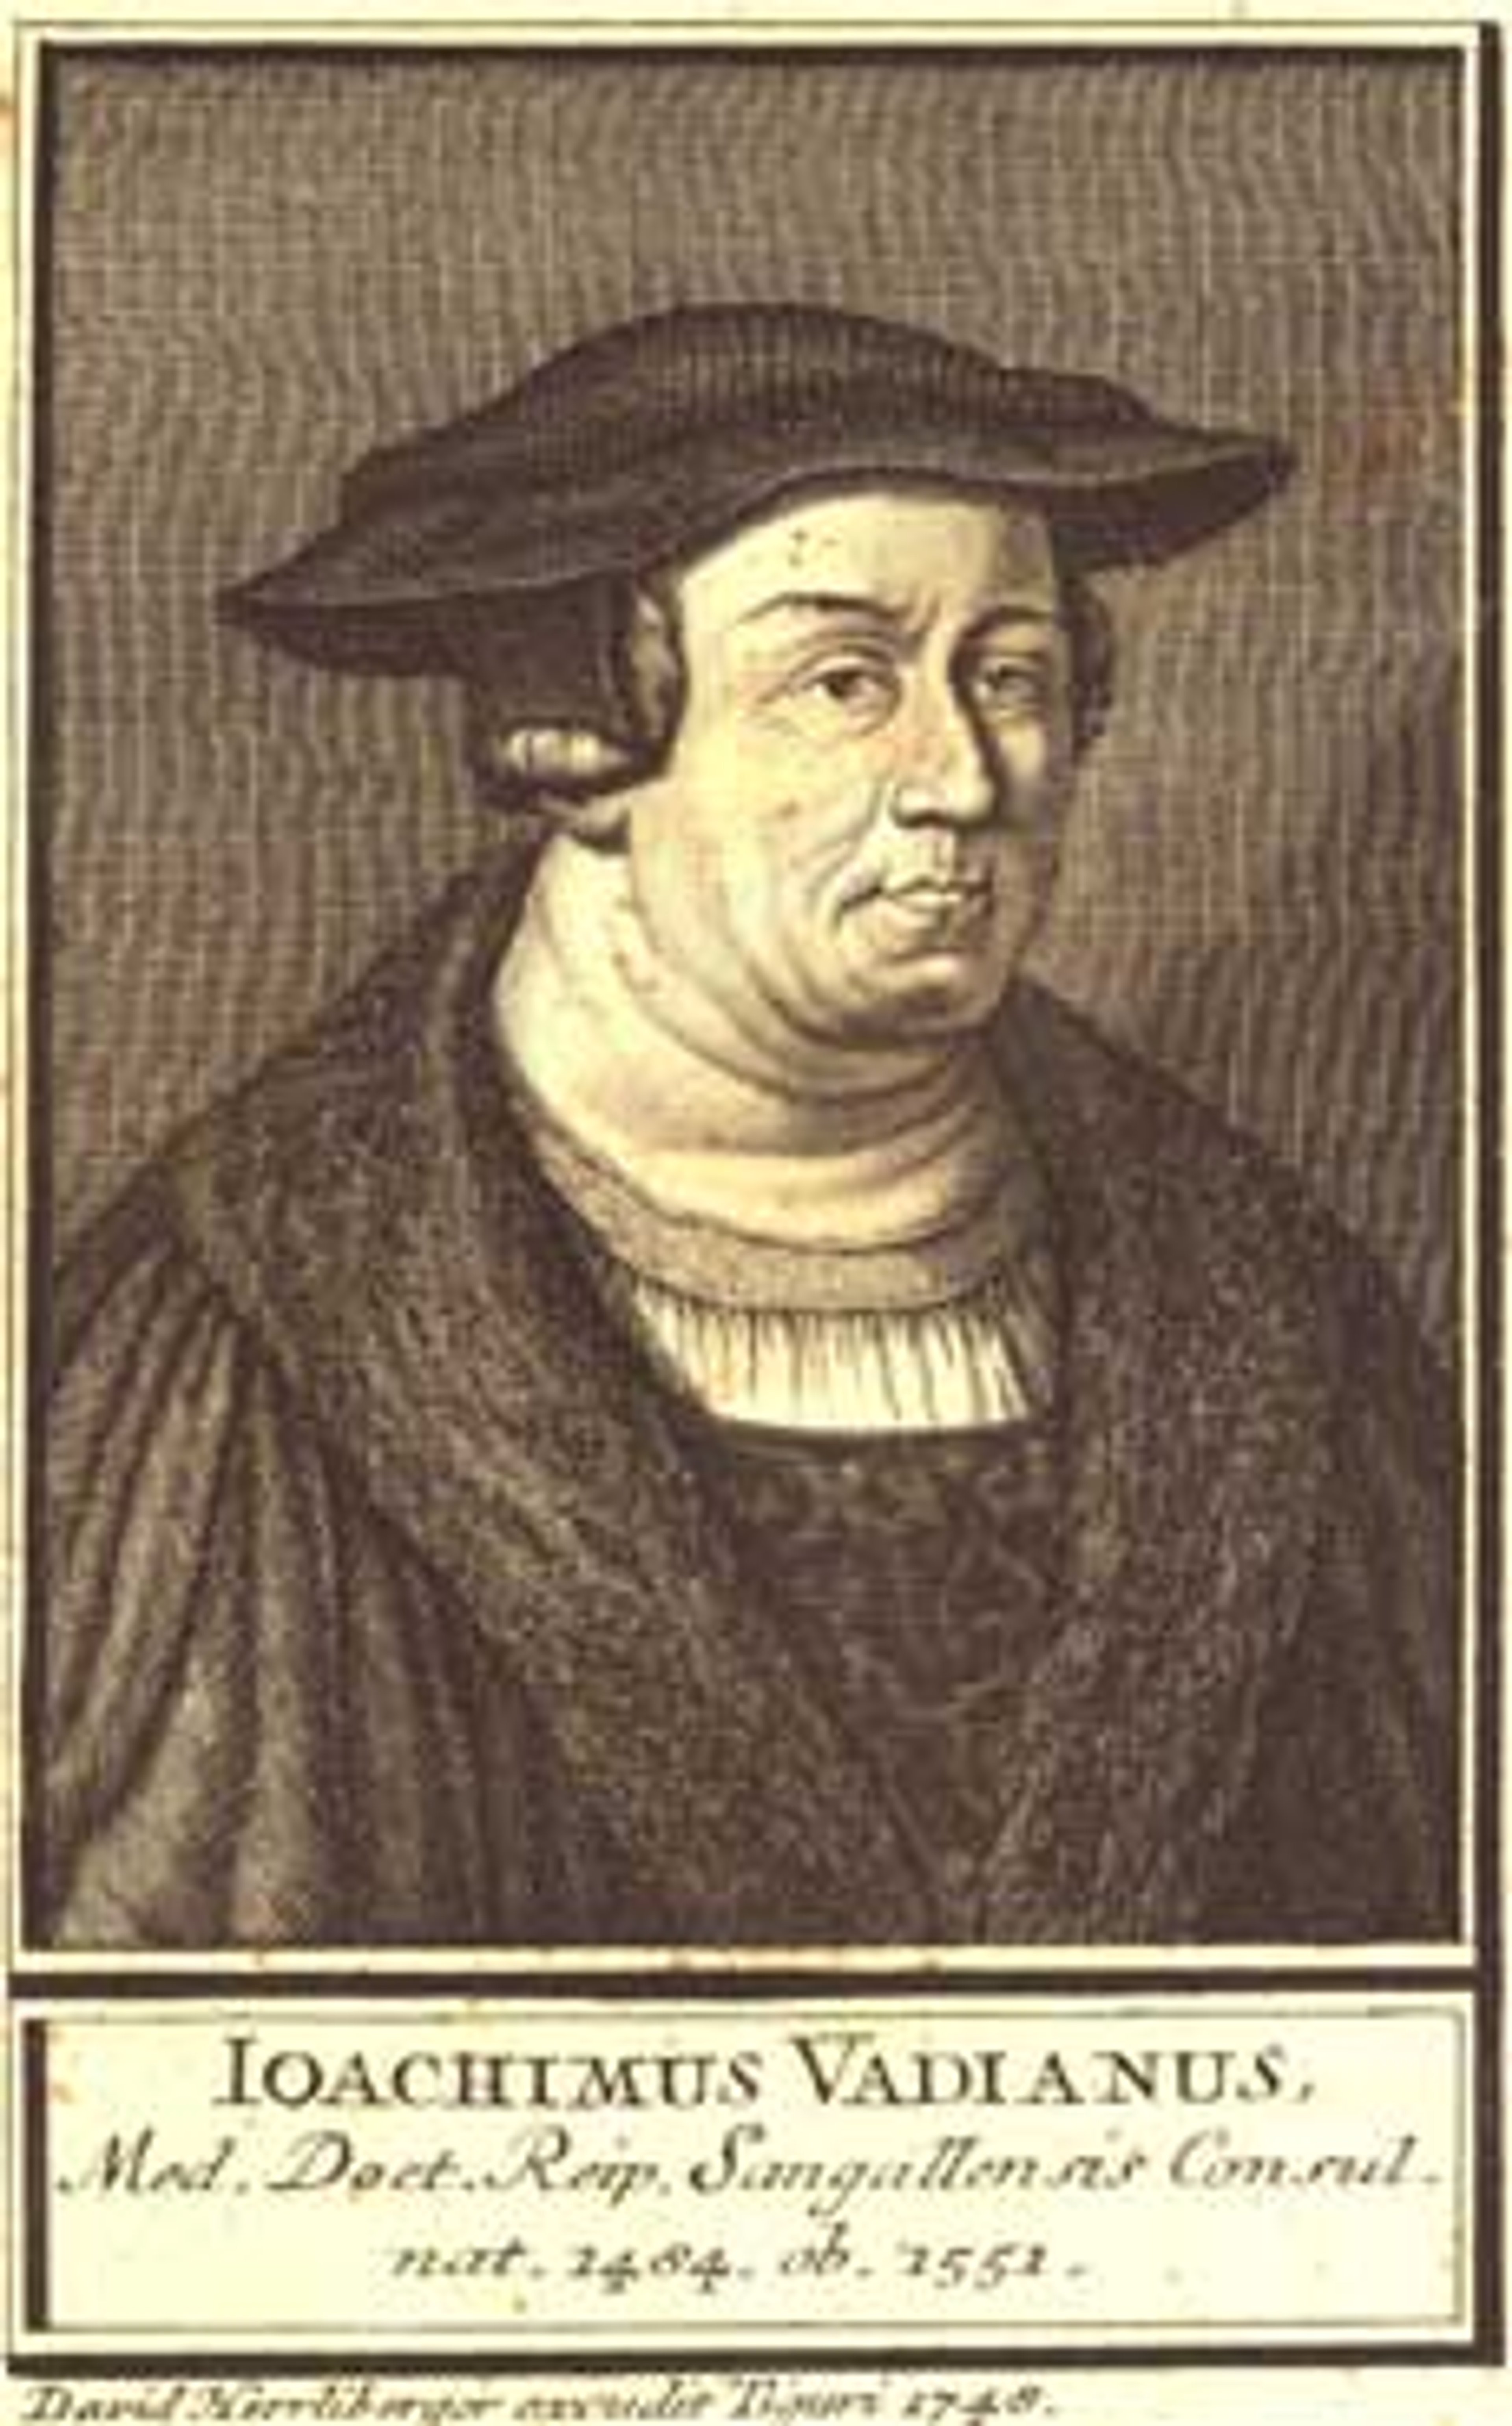 Black and white portrait of Joachim Vadianus, a man, wearing dark robes and a hat. Text at the bottom of the image reads: Ioachimus Vadianus.